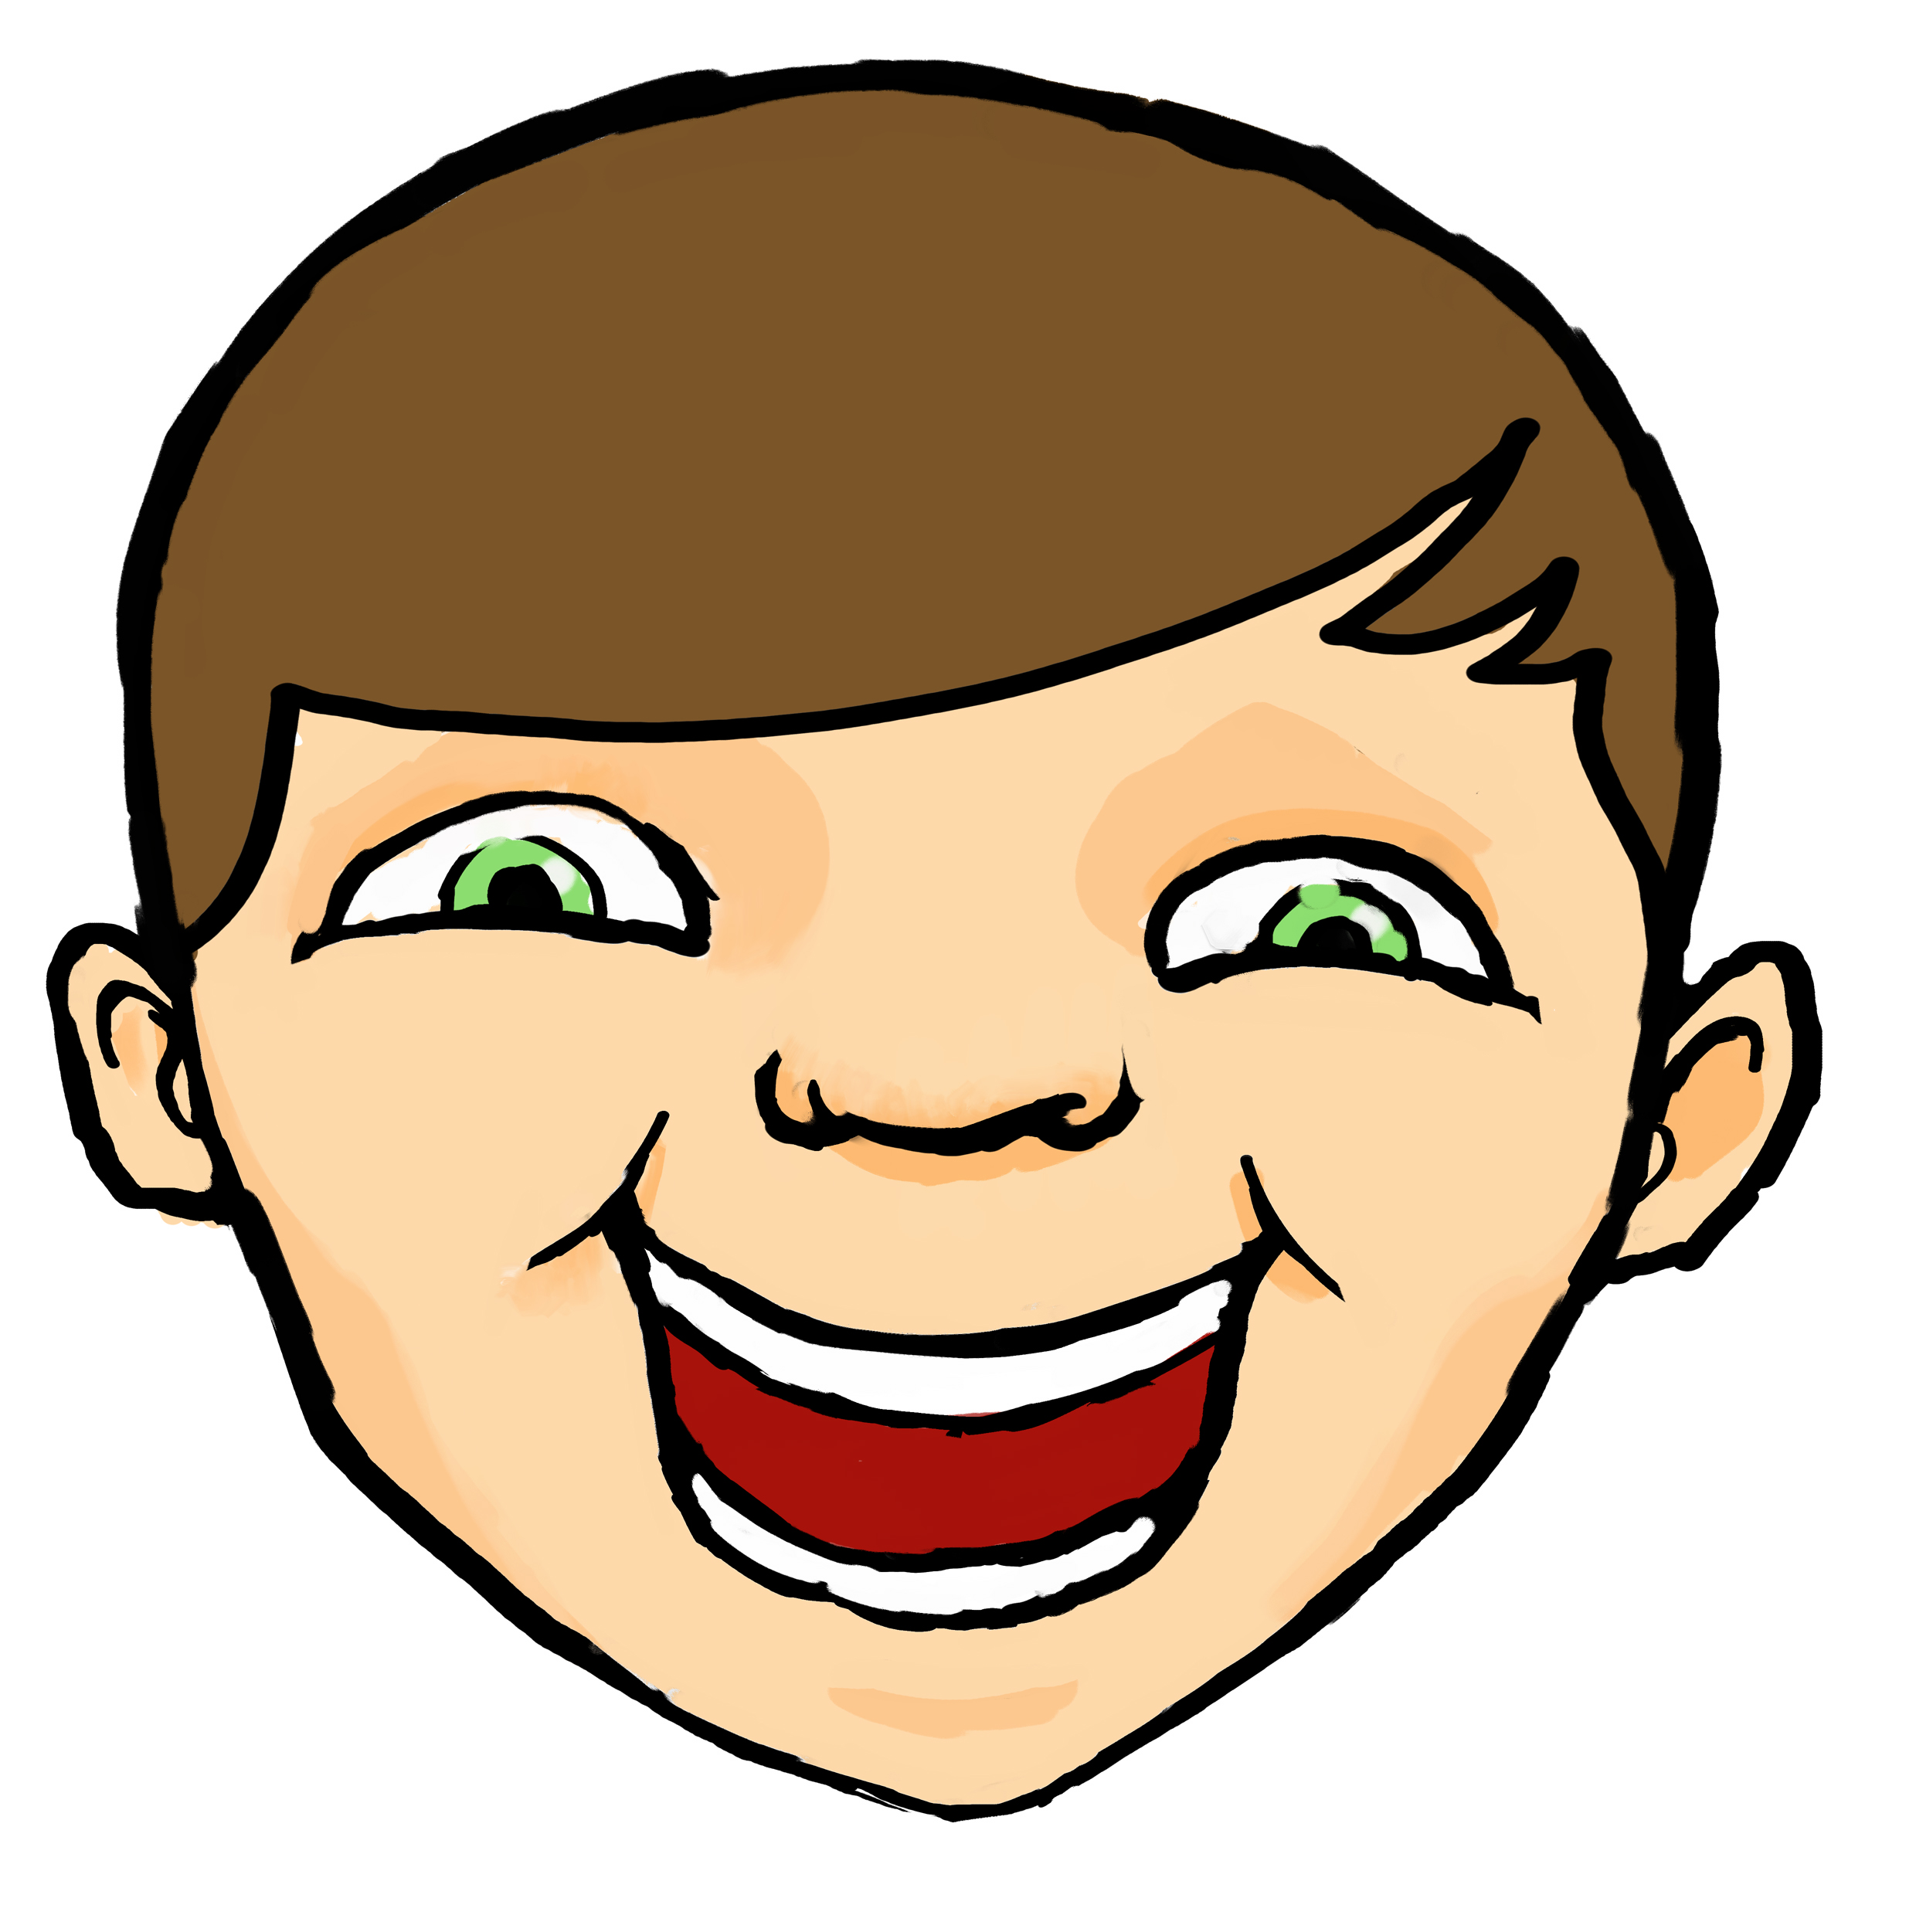 Laughing Face Clip Art - Clipart library